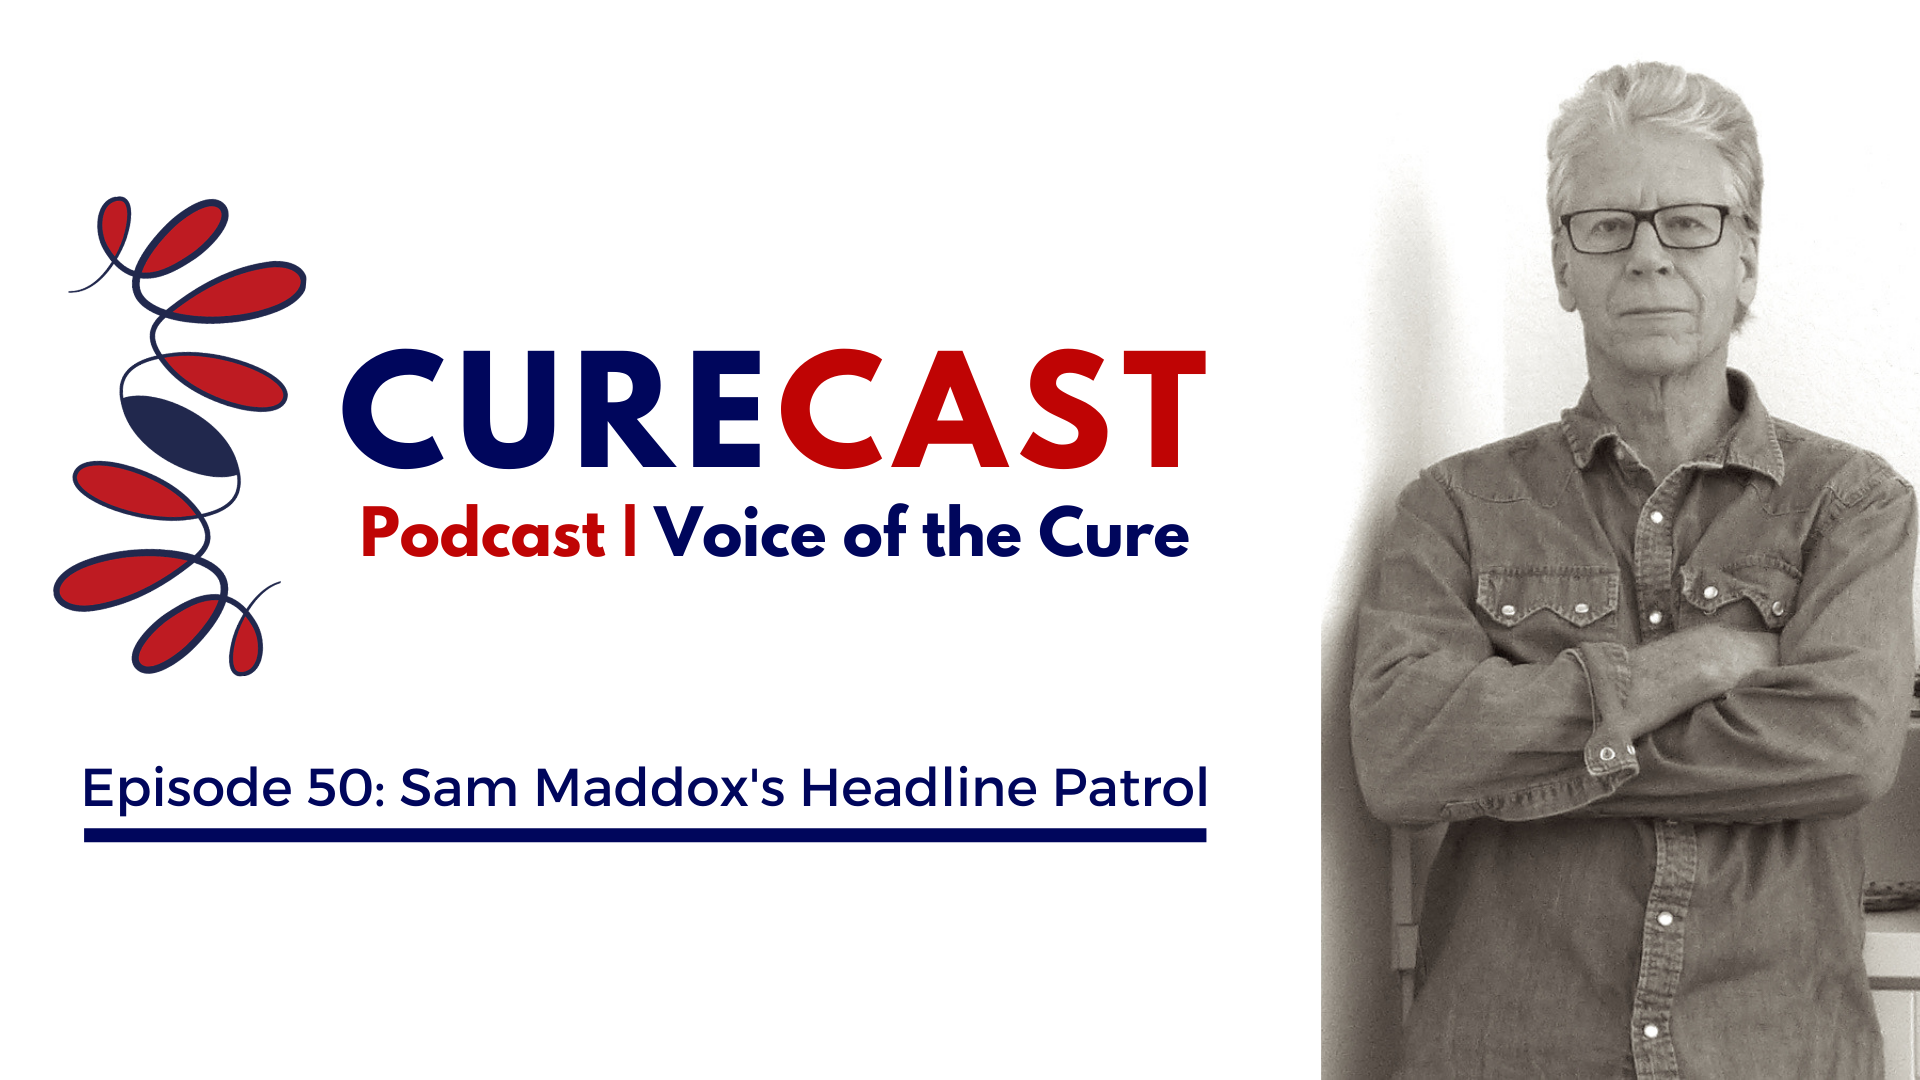 Sam Maddox talks about dissecting SCI headlines